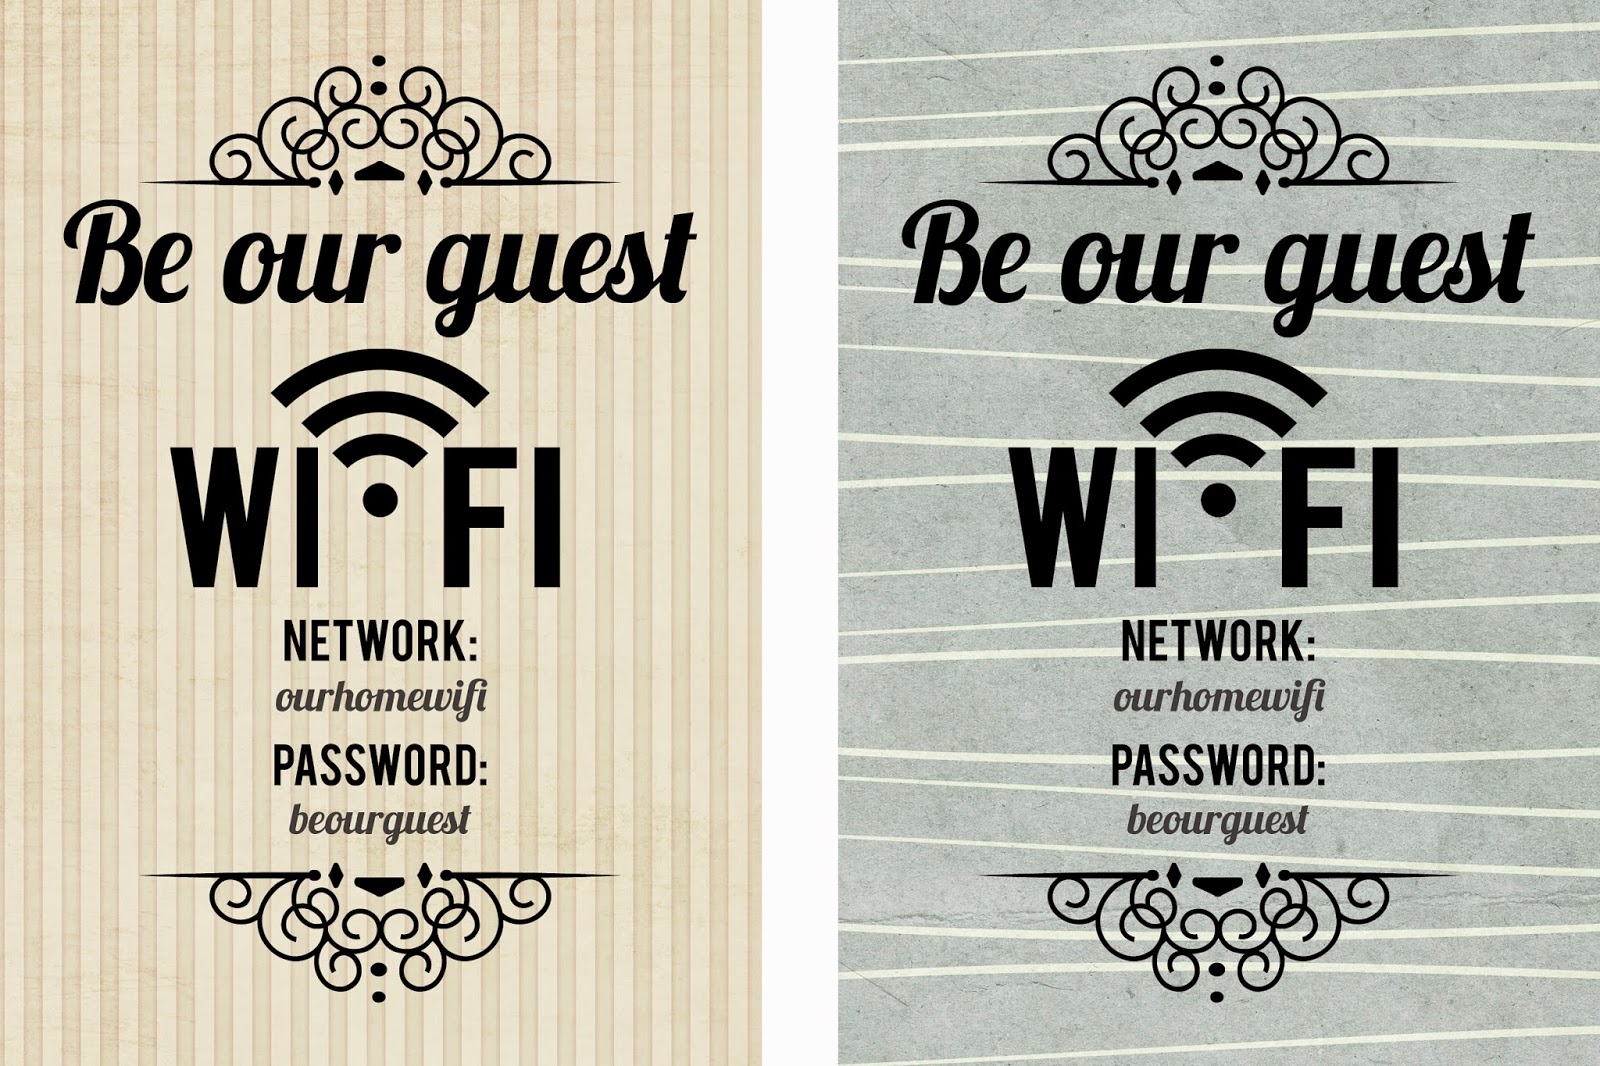 Why You Should Setup a Guest WiFi Network for Your Home Dignited